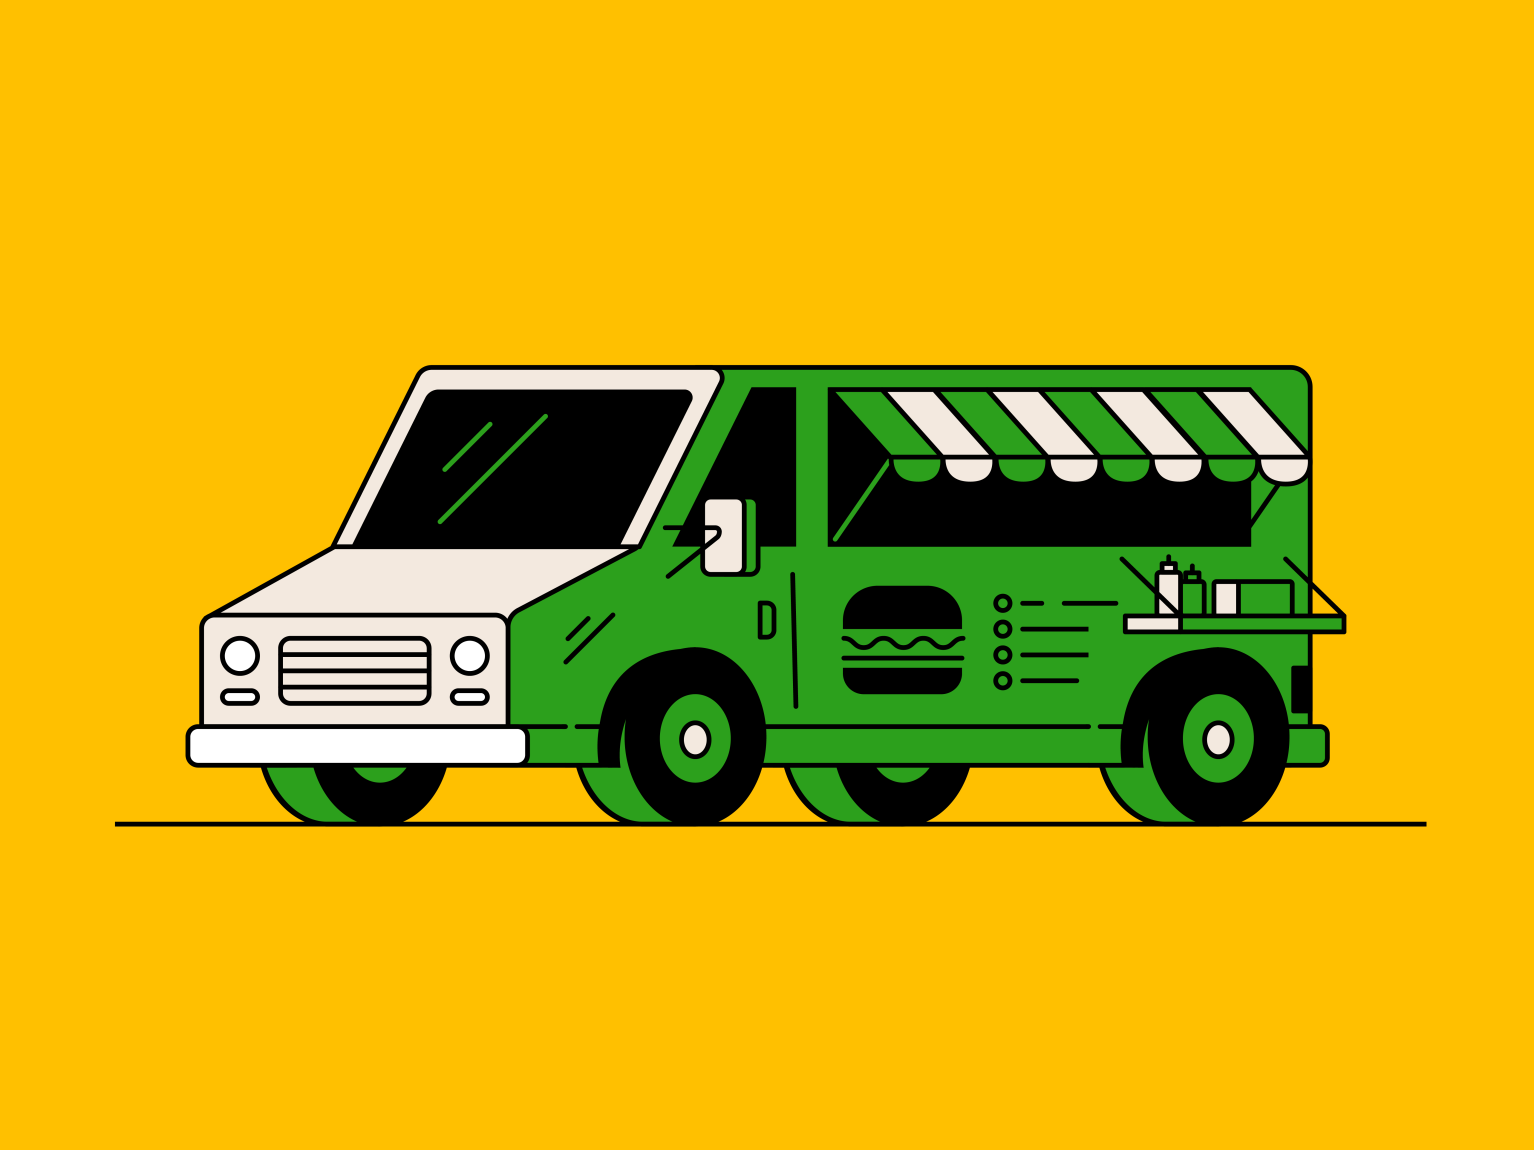 Food Truck by Andrew Alimbuyuguen on Dribbble